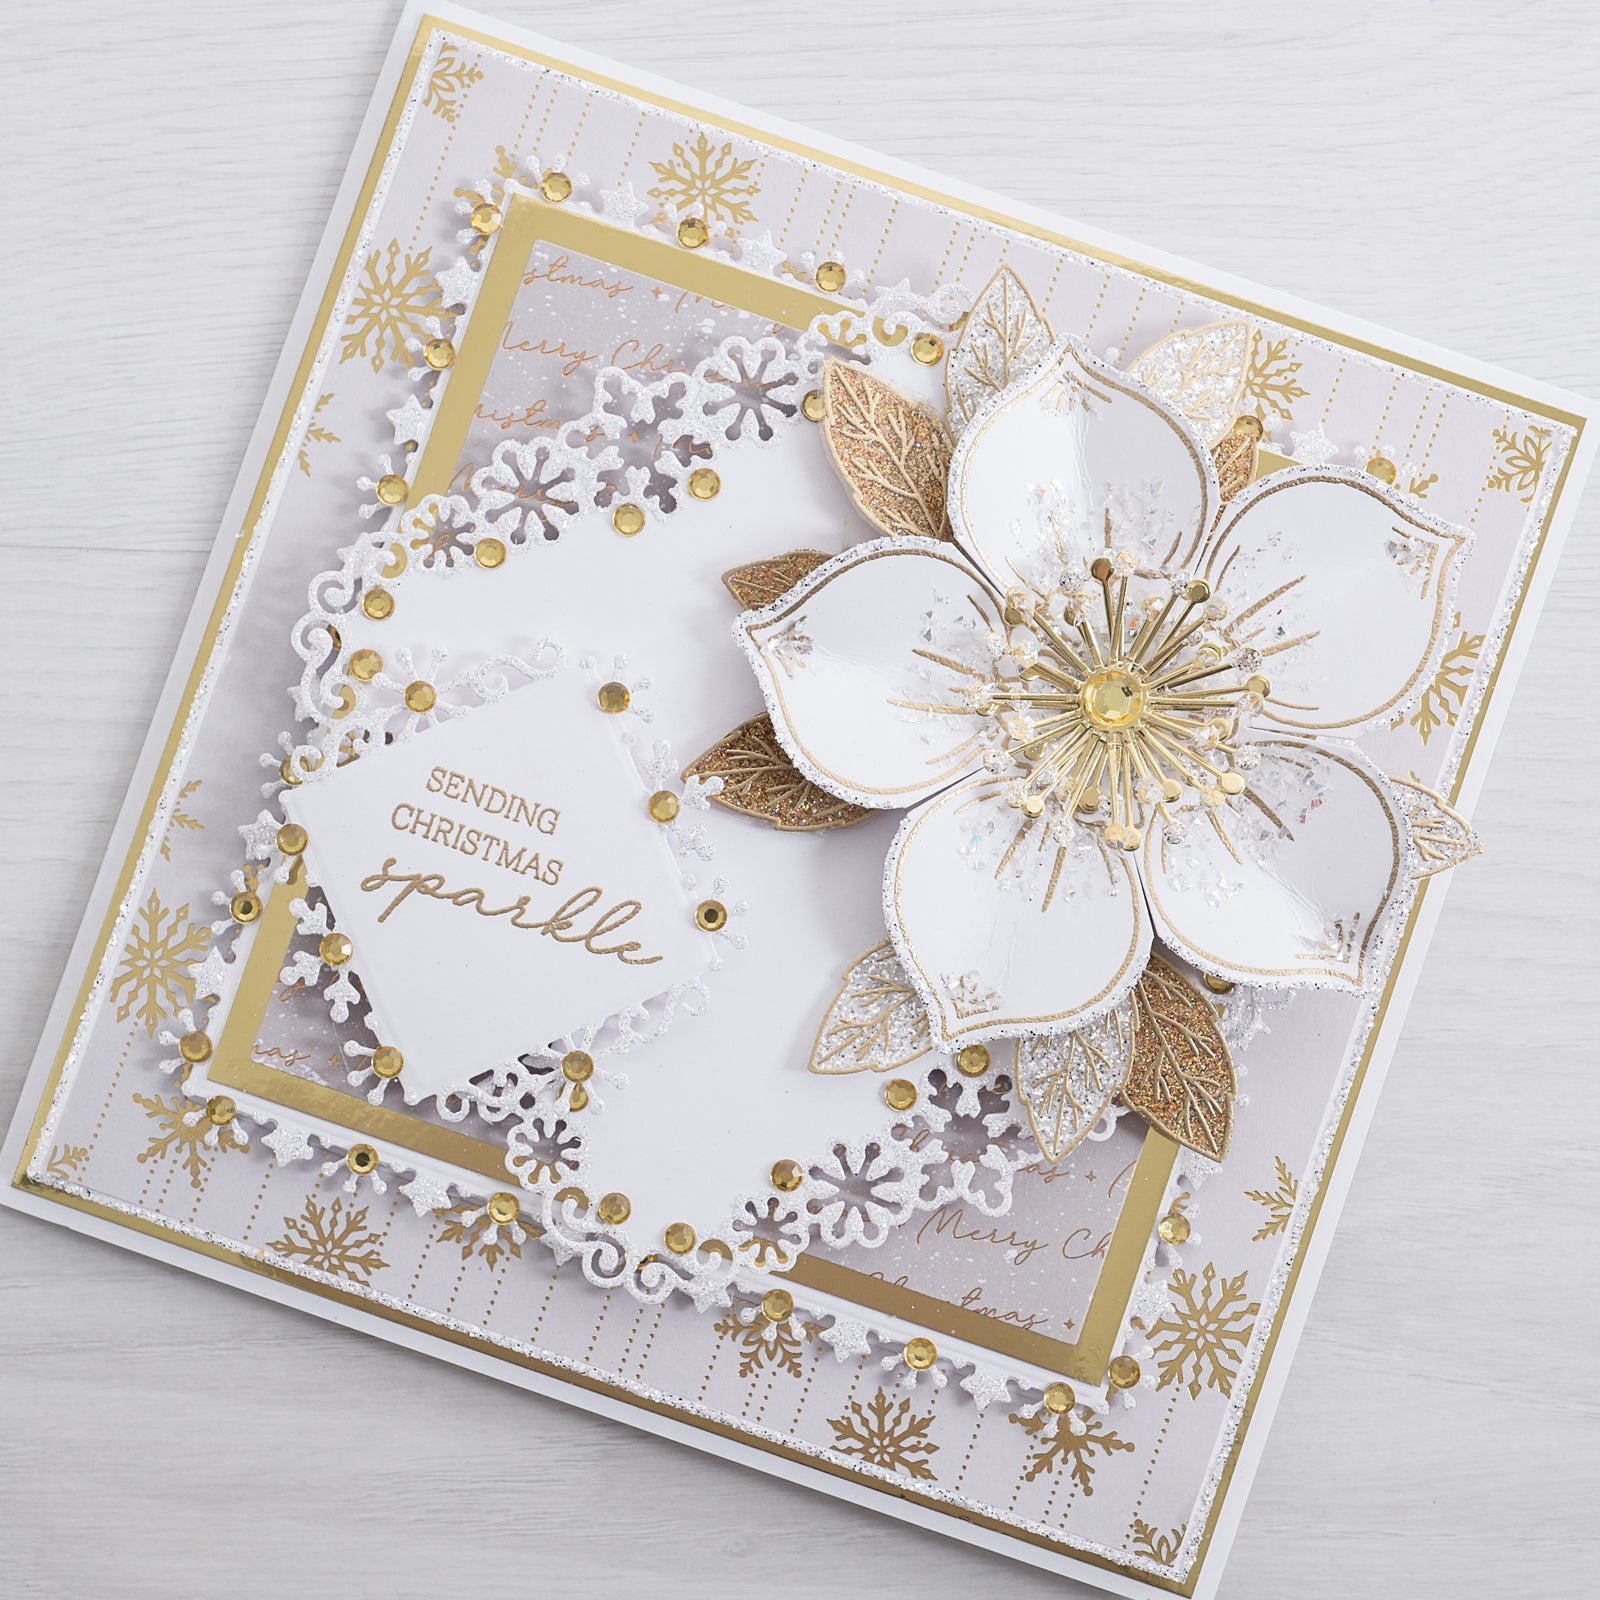 Learn how to make your own beautiful Christmas cards at home using this step-by-step tutorial fro Chloes Creative Cards. This classic white and gold Christmas flower card is a timeless classic filled with sparkling glitter!